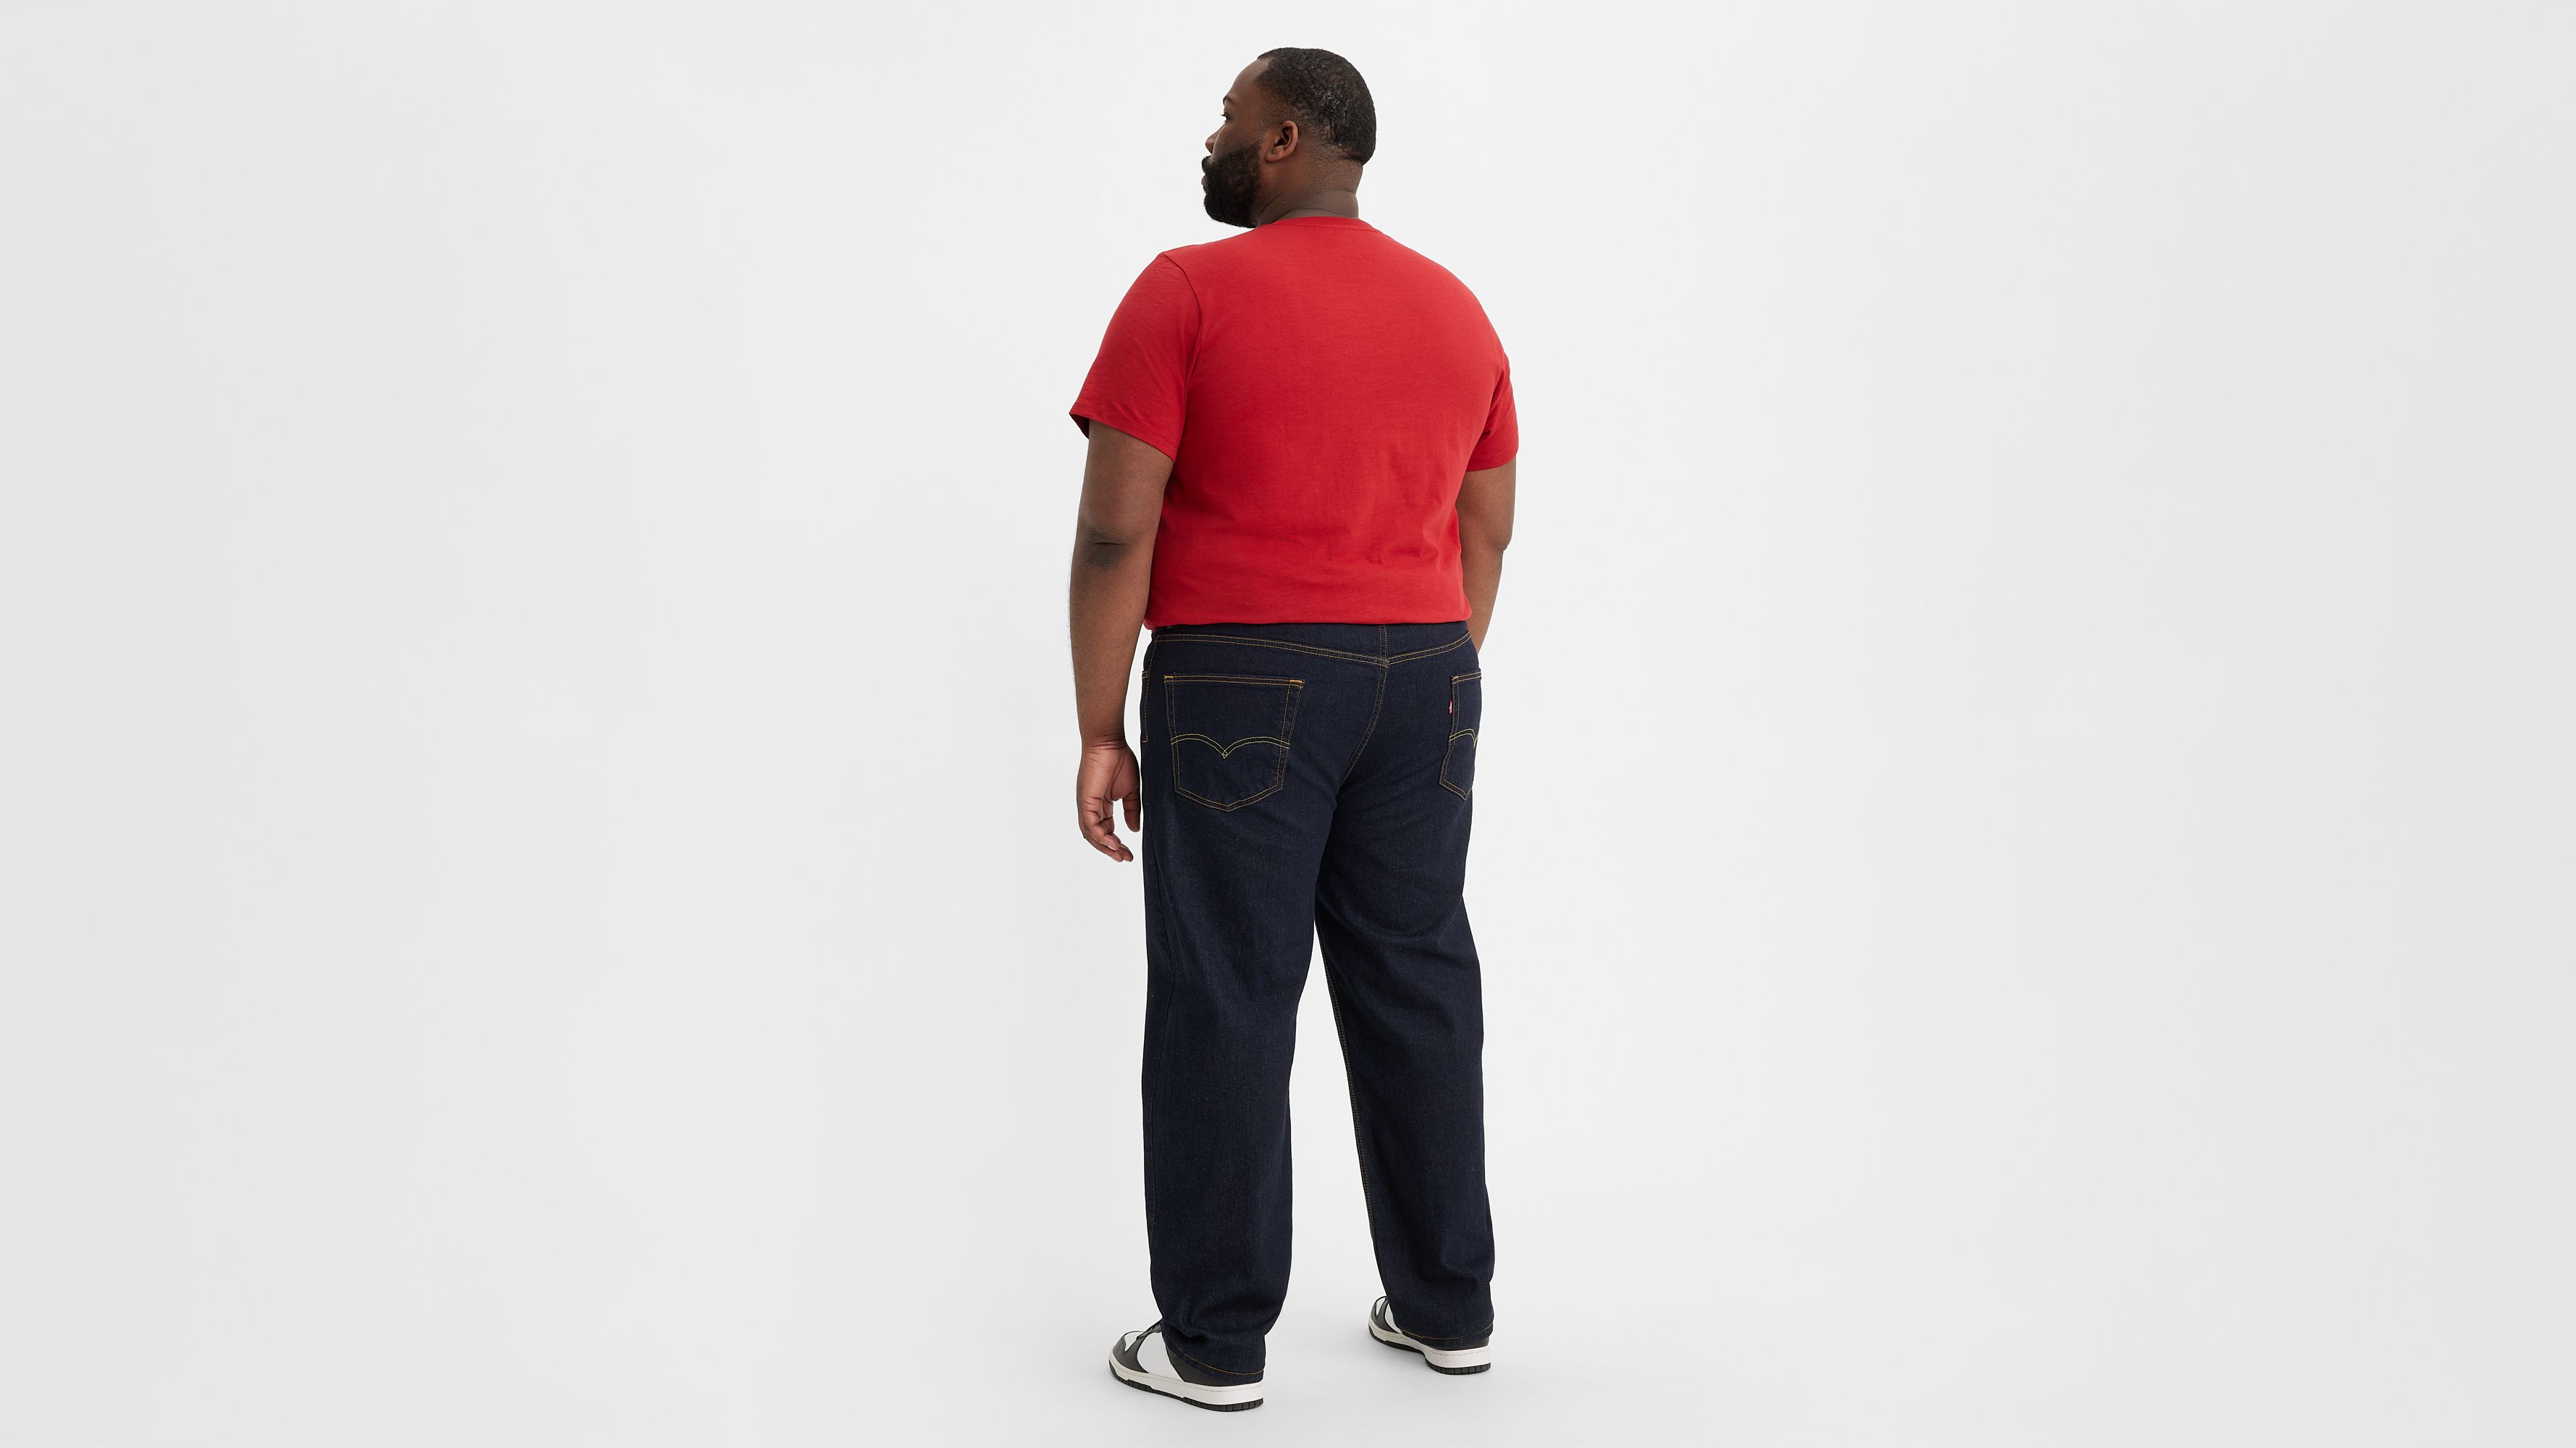 levi's relaxed fit jeans mens